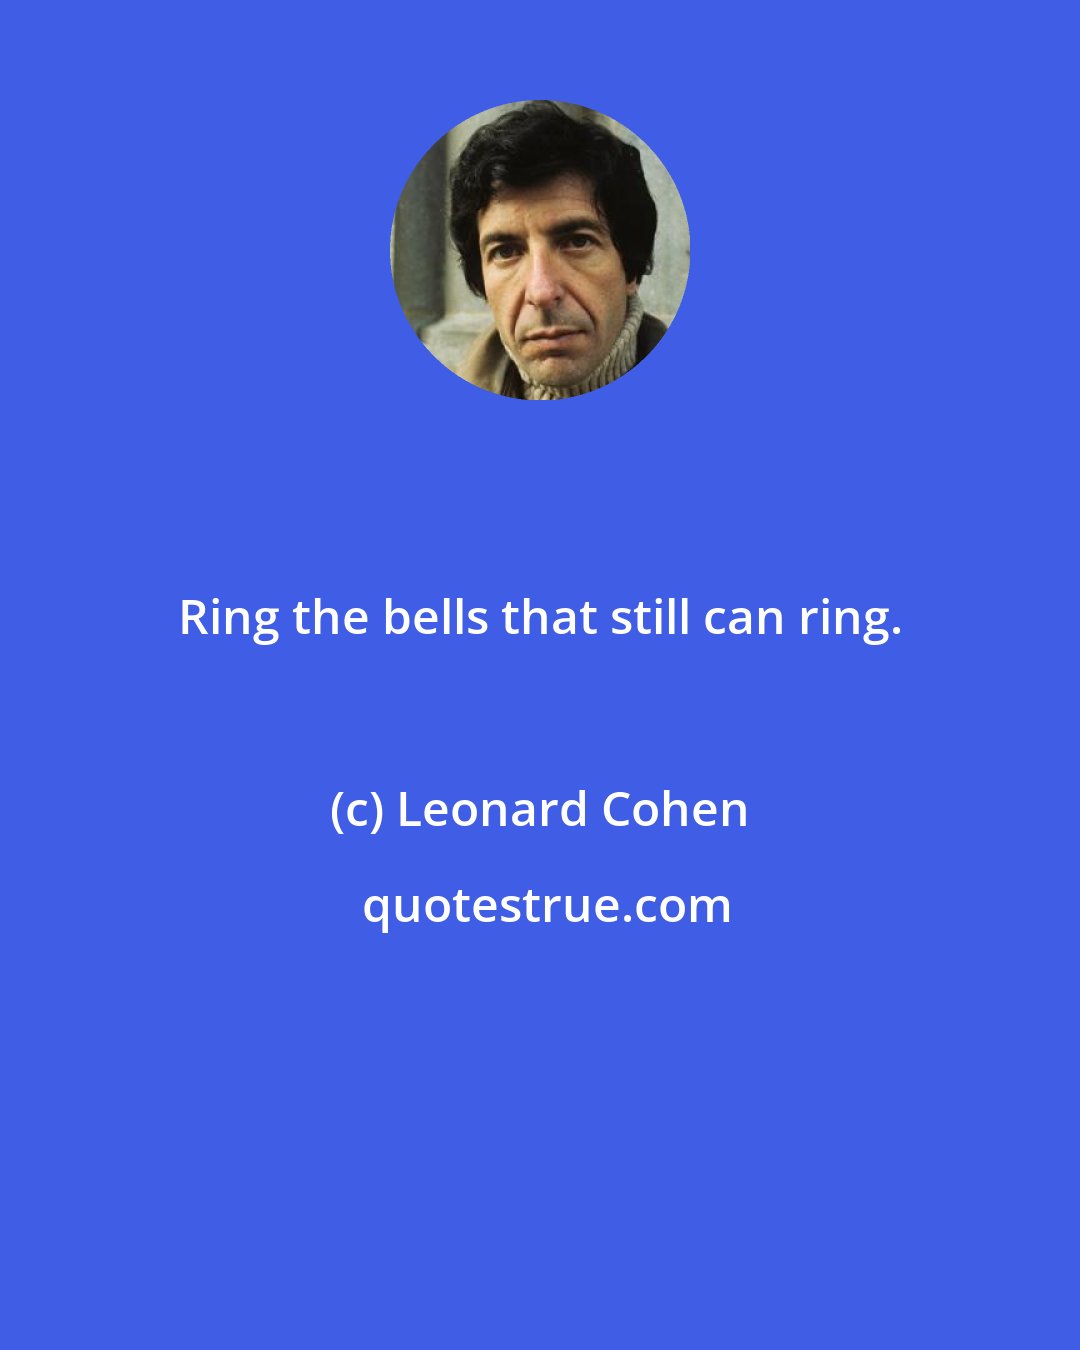 Leonard Cohen: Ring the bells that still can ring.